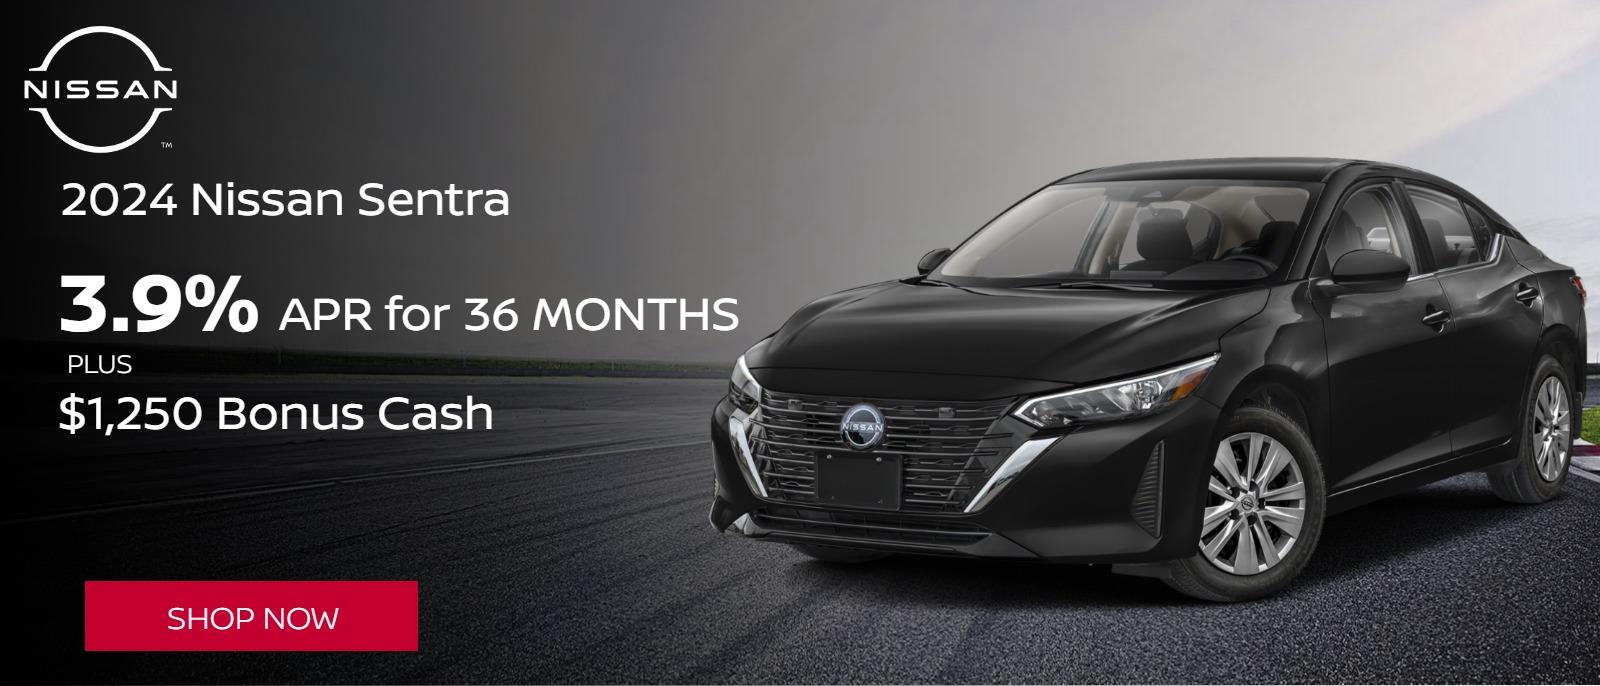 Great APR offer on Sentra